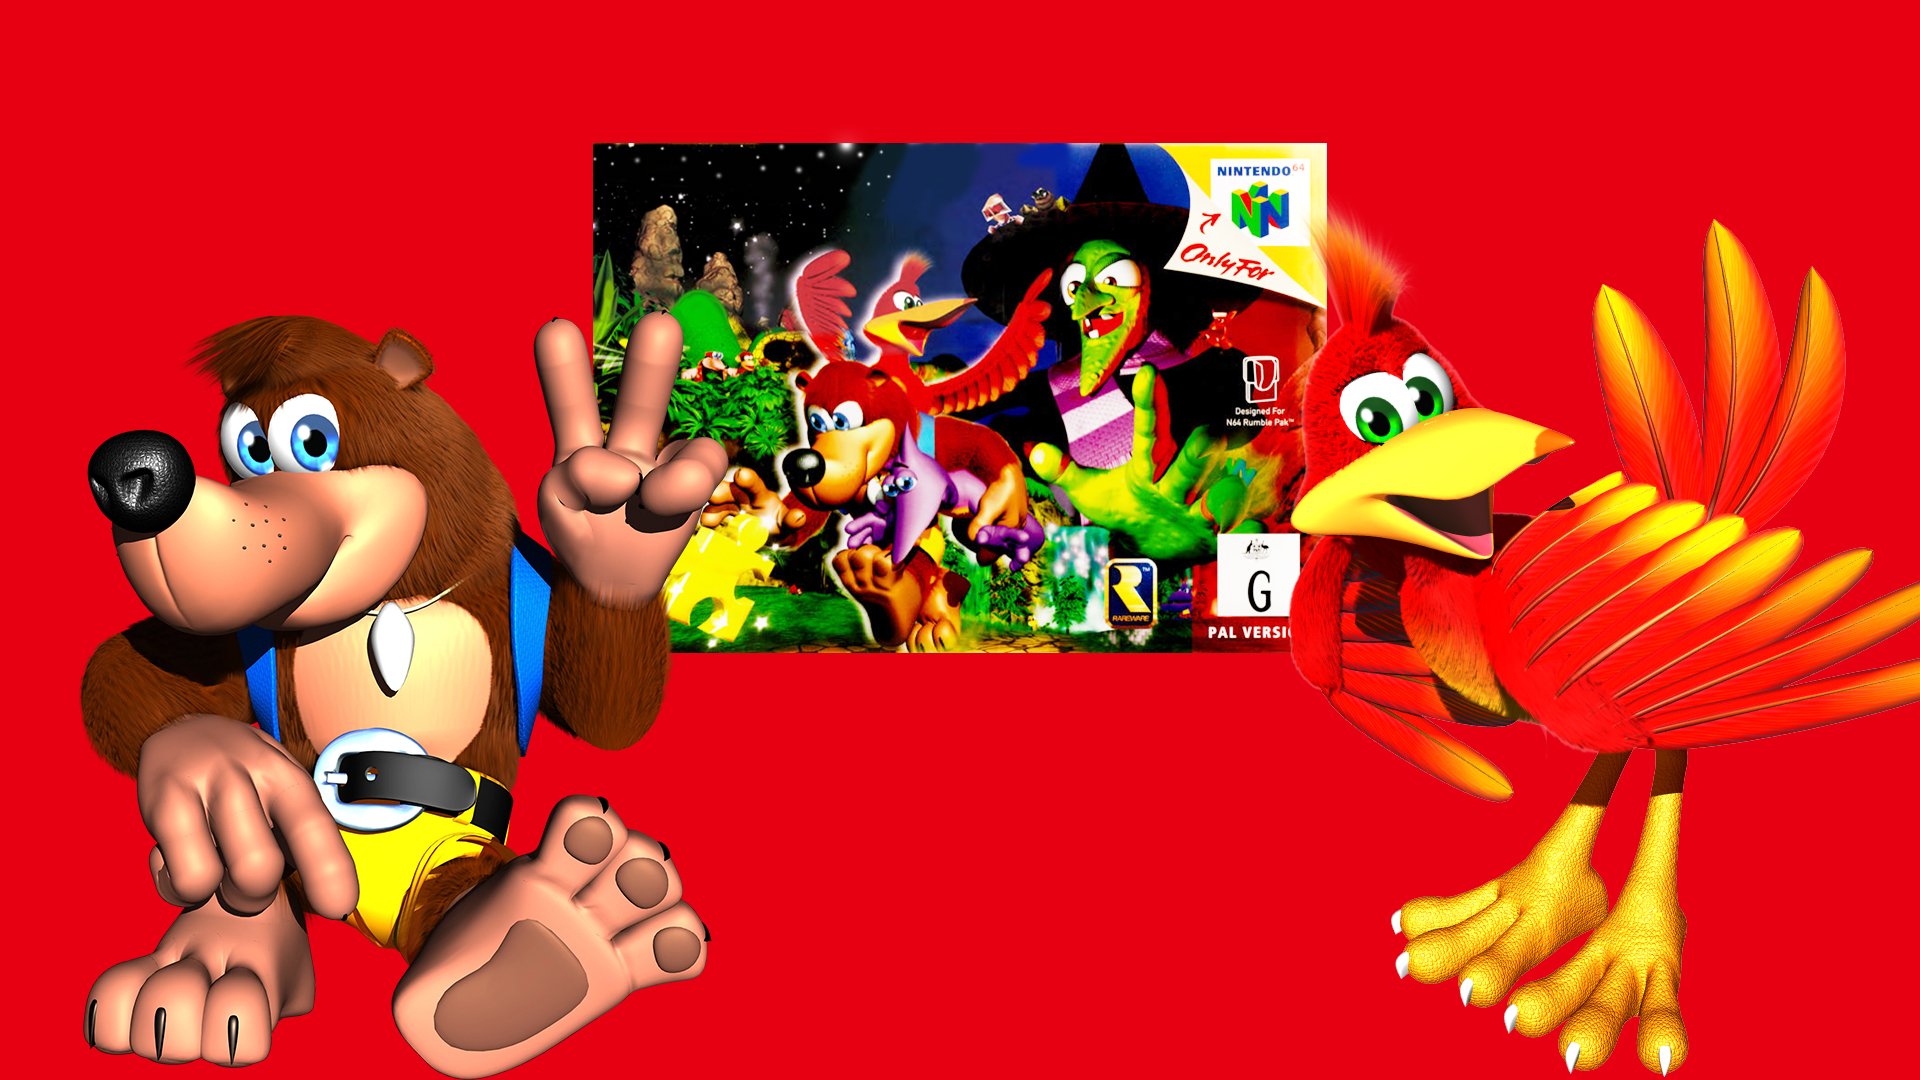 Banjo-Kazooie' hits Nintendo's Switch Online Expansion Pack on January 20